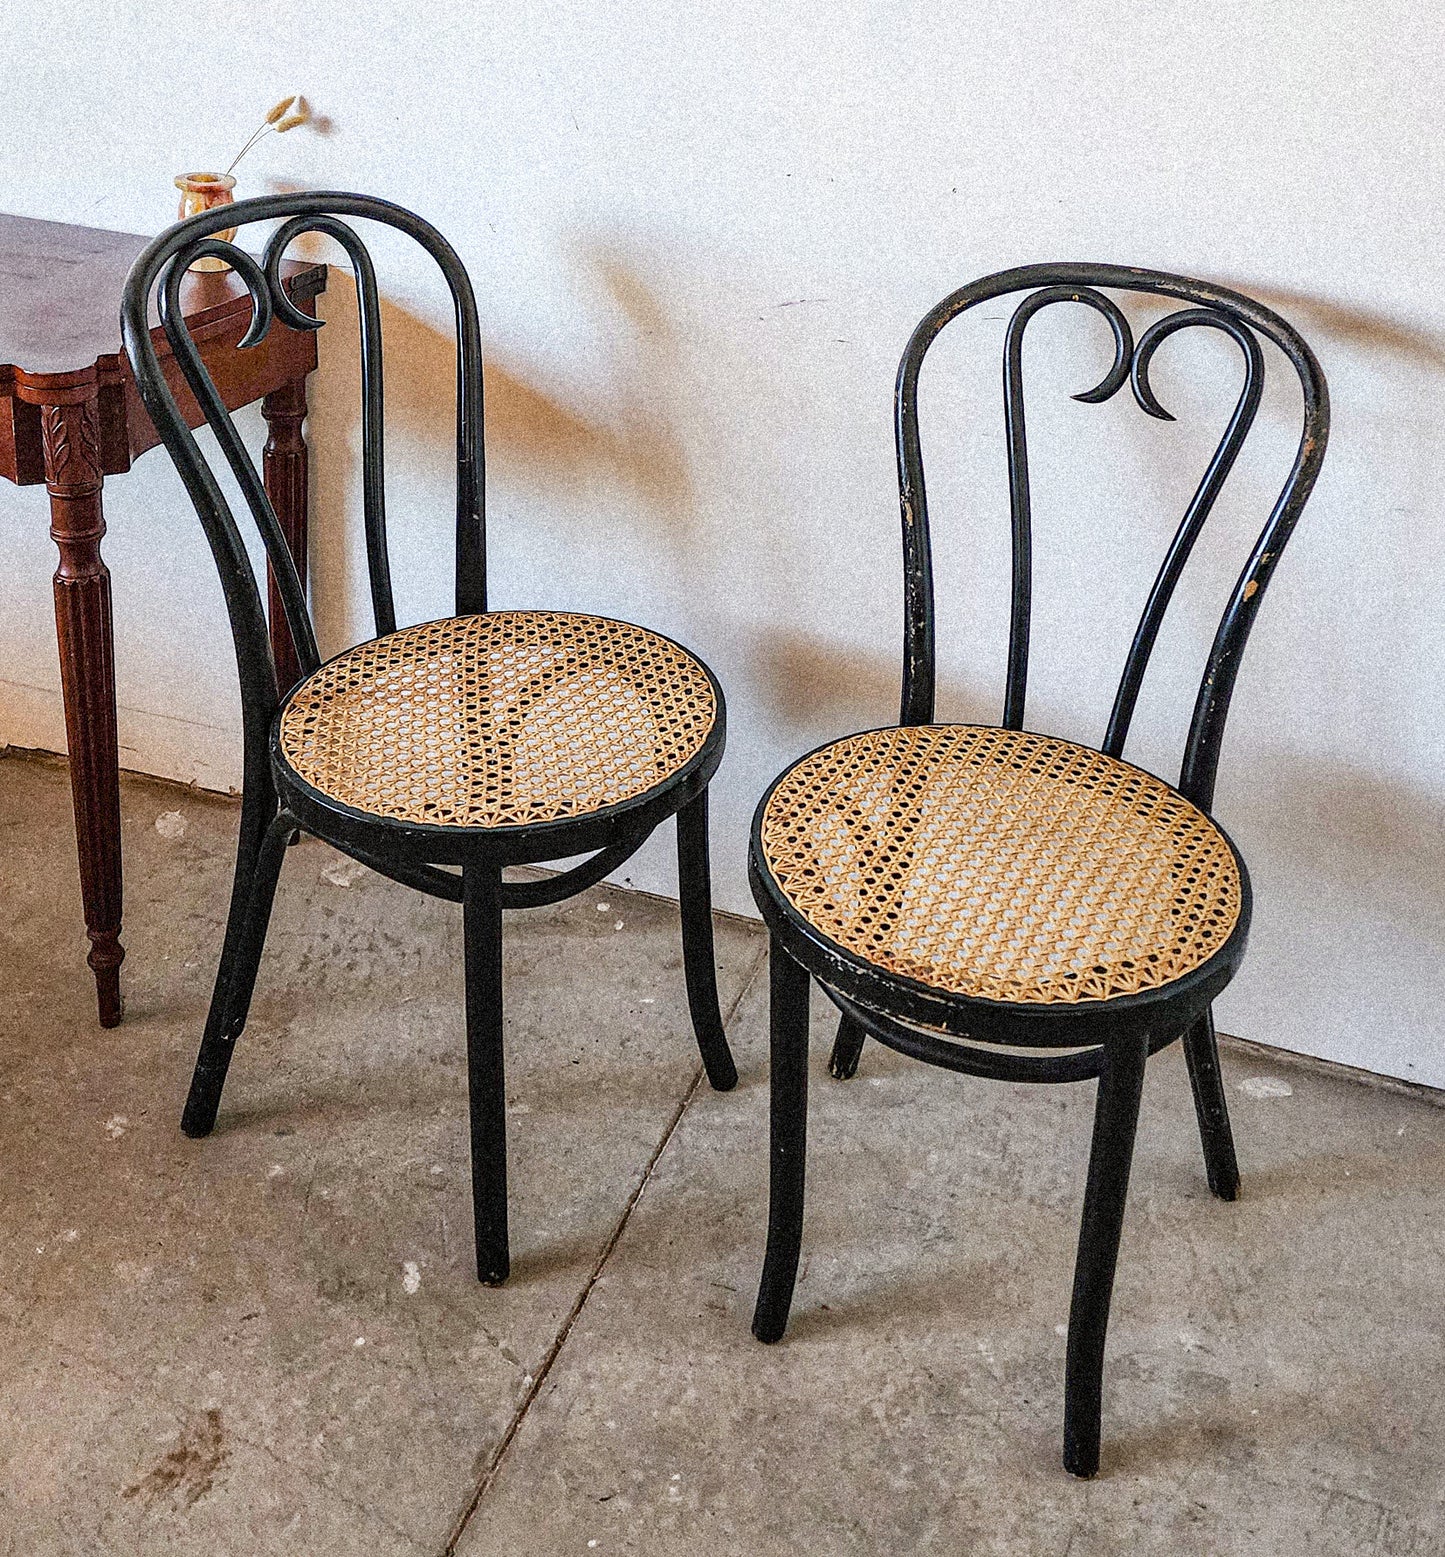 Vintage Black Bentwood Caned Dining Chair - Reclaimed Mt. Goods